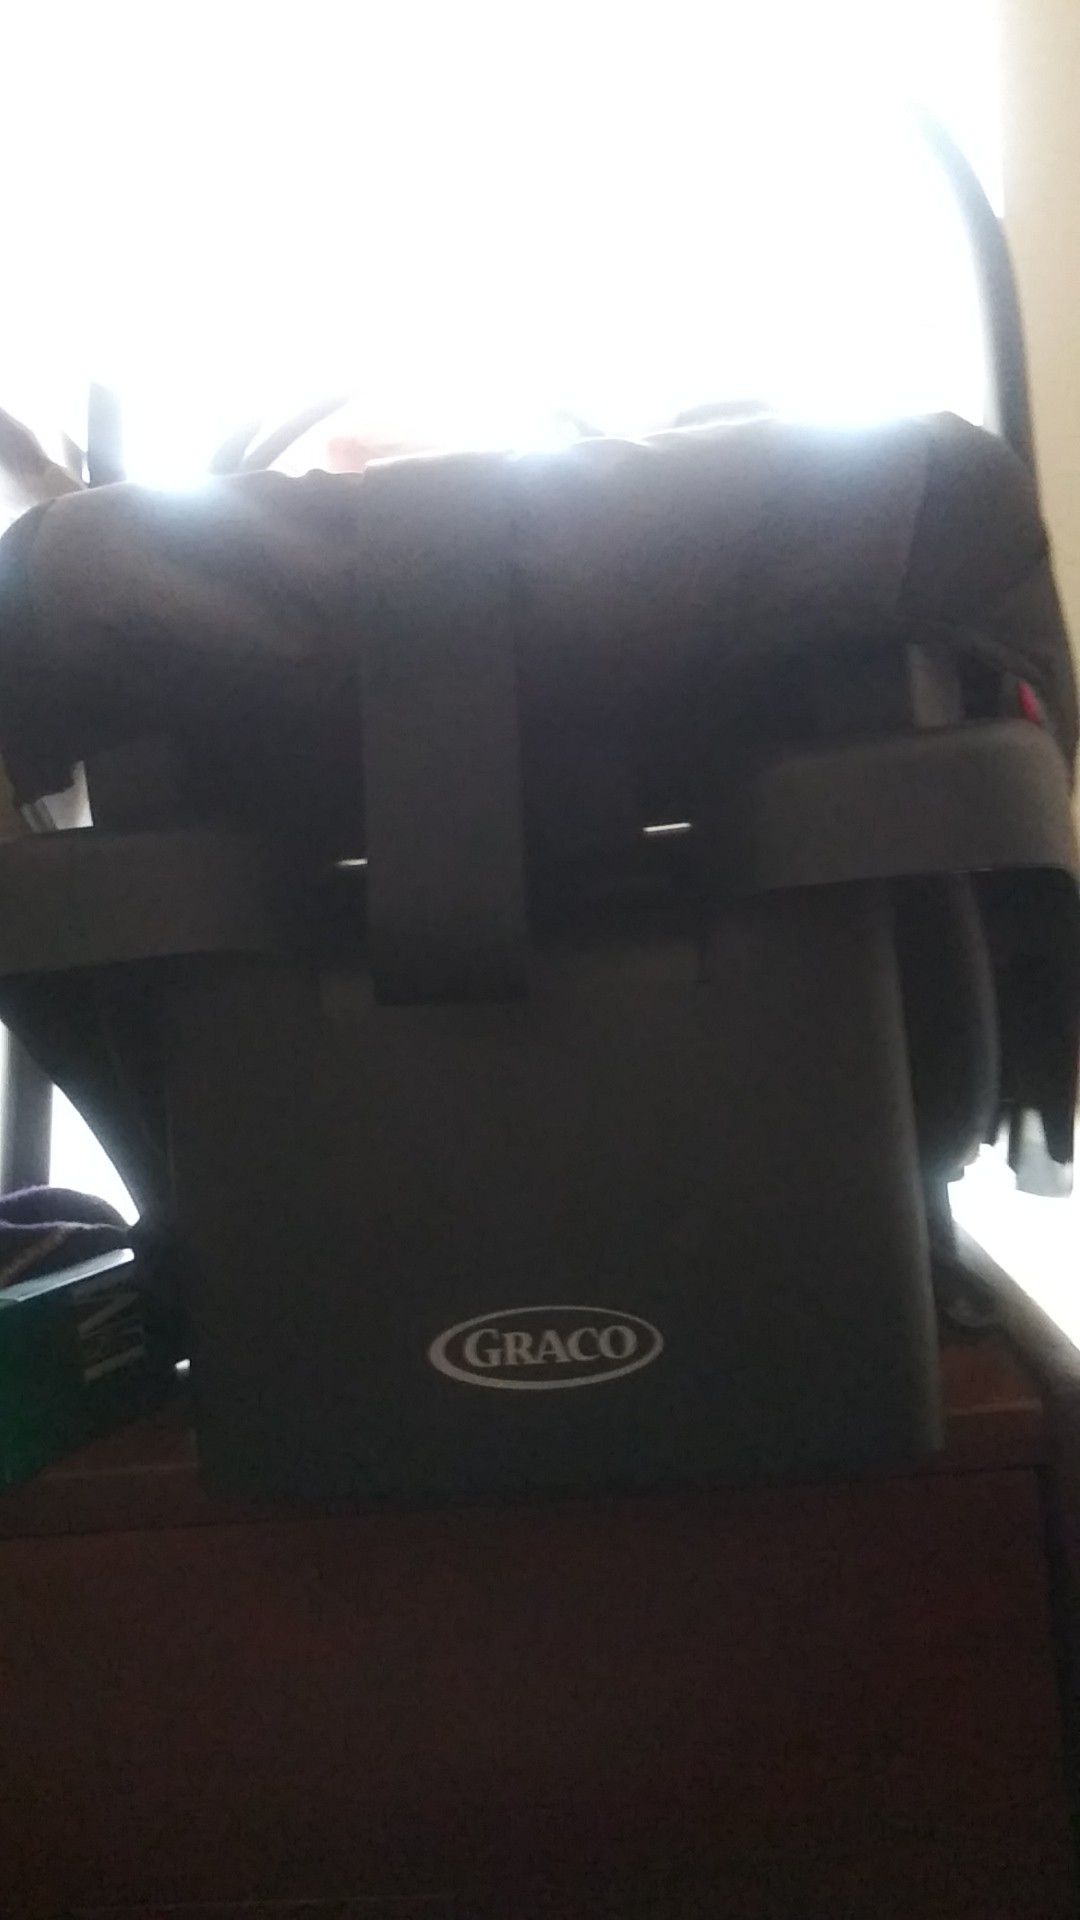 Graco click connect carseat for infants